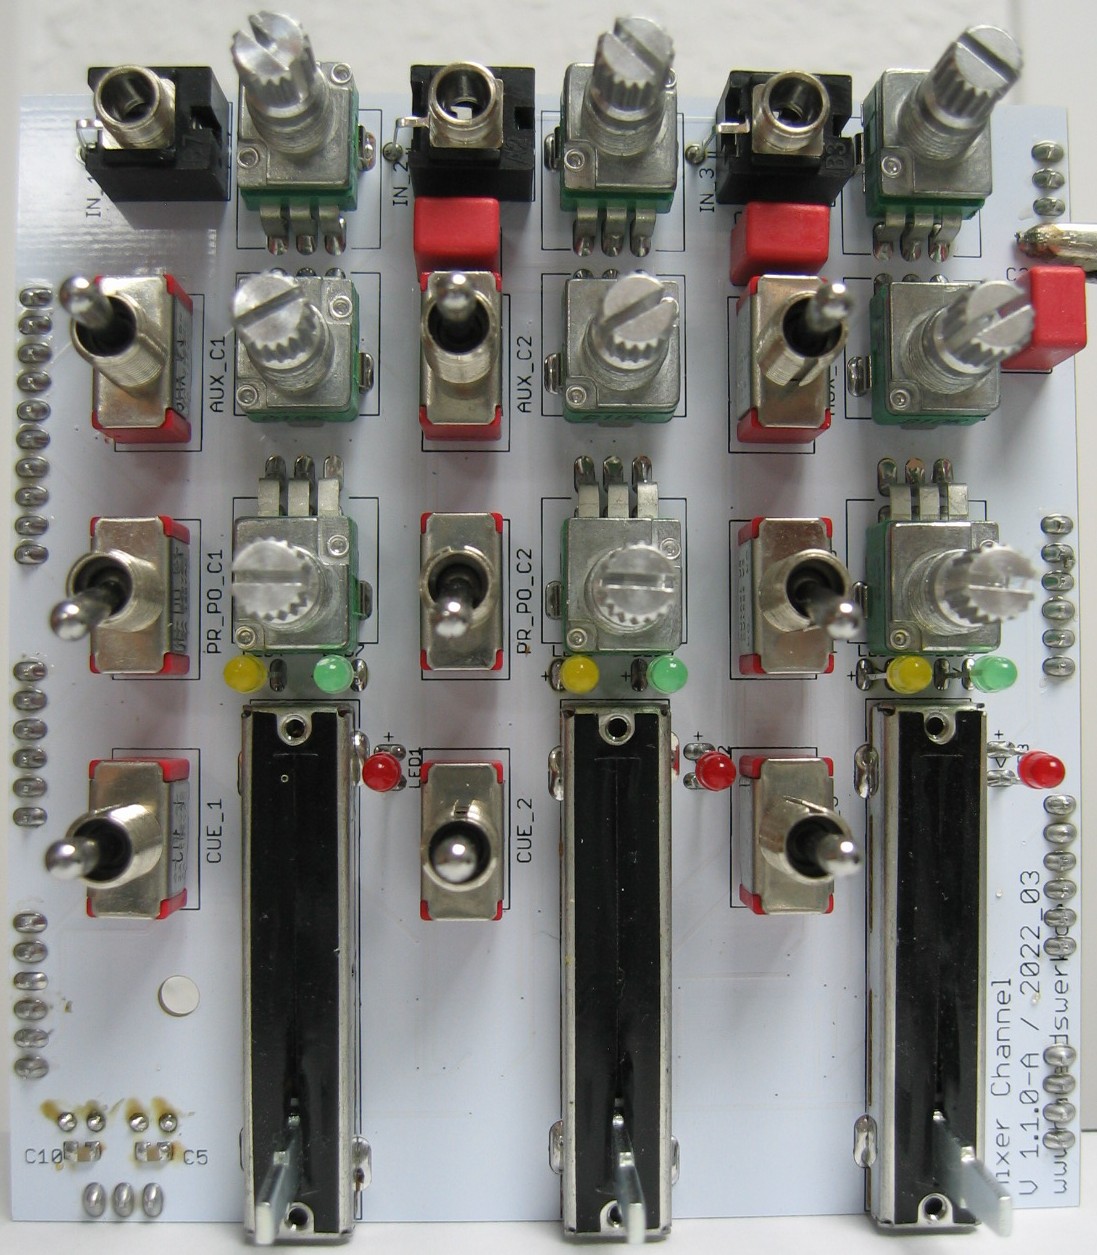 Performance Mixer Channel populated control PCB top